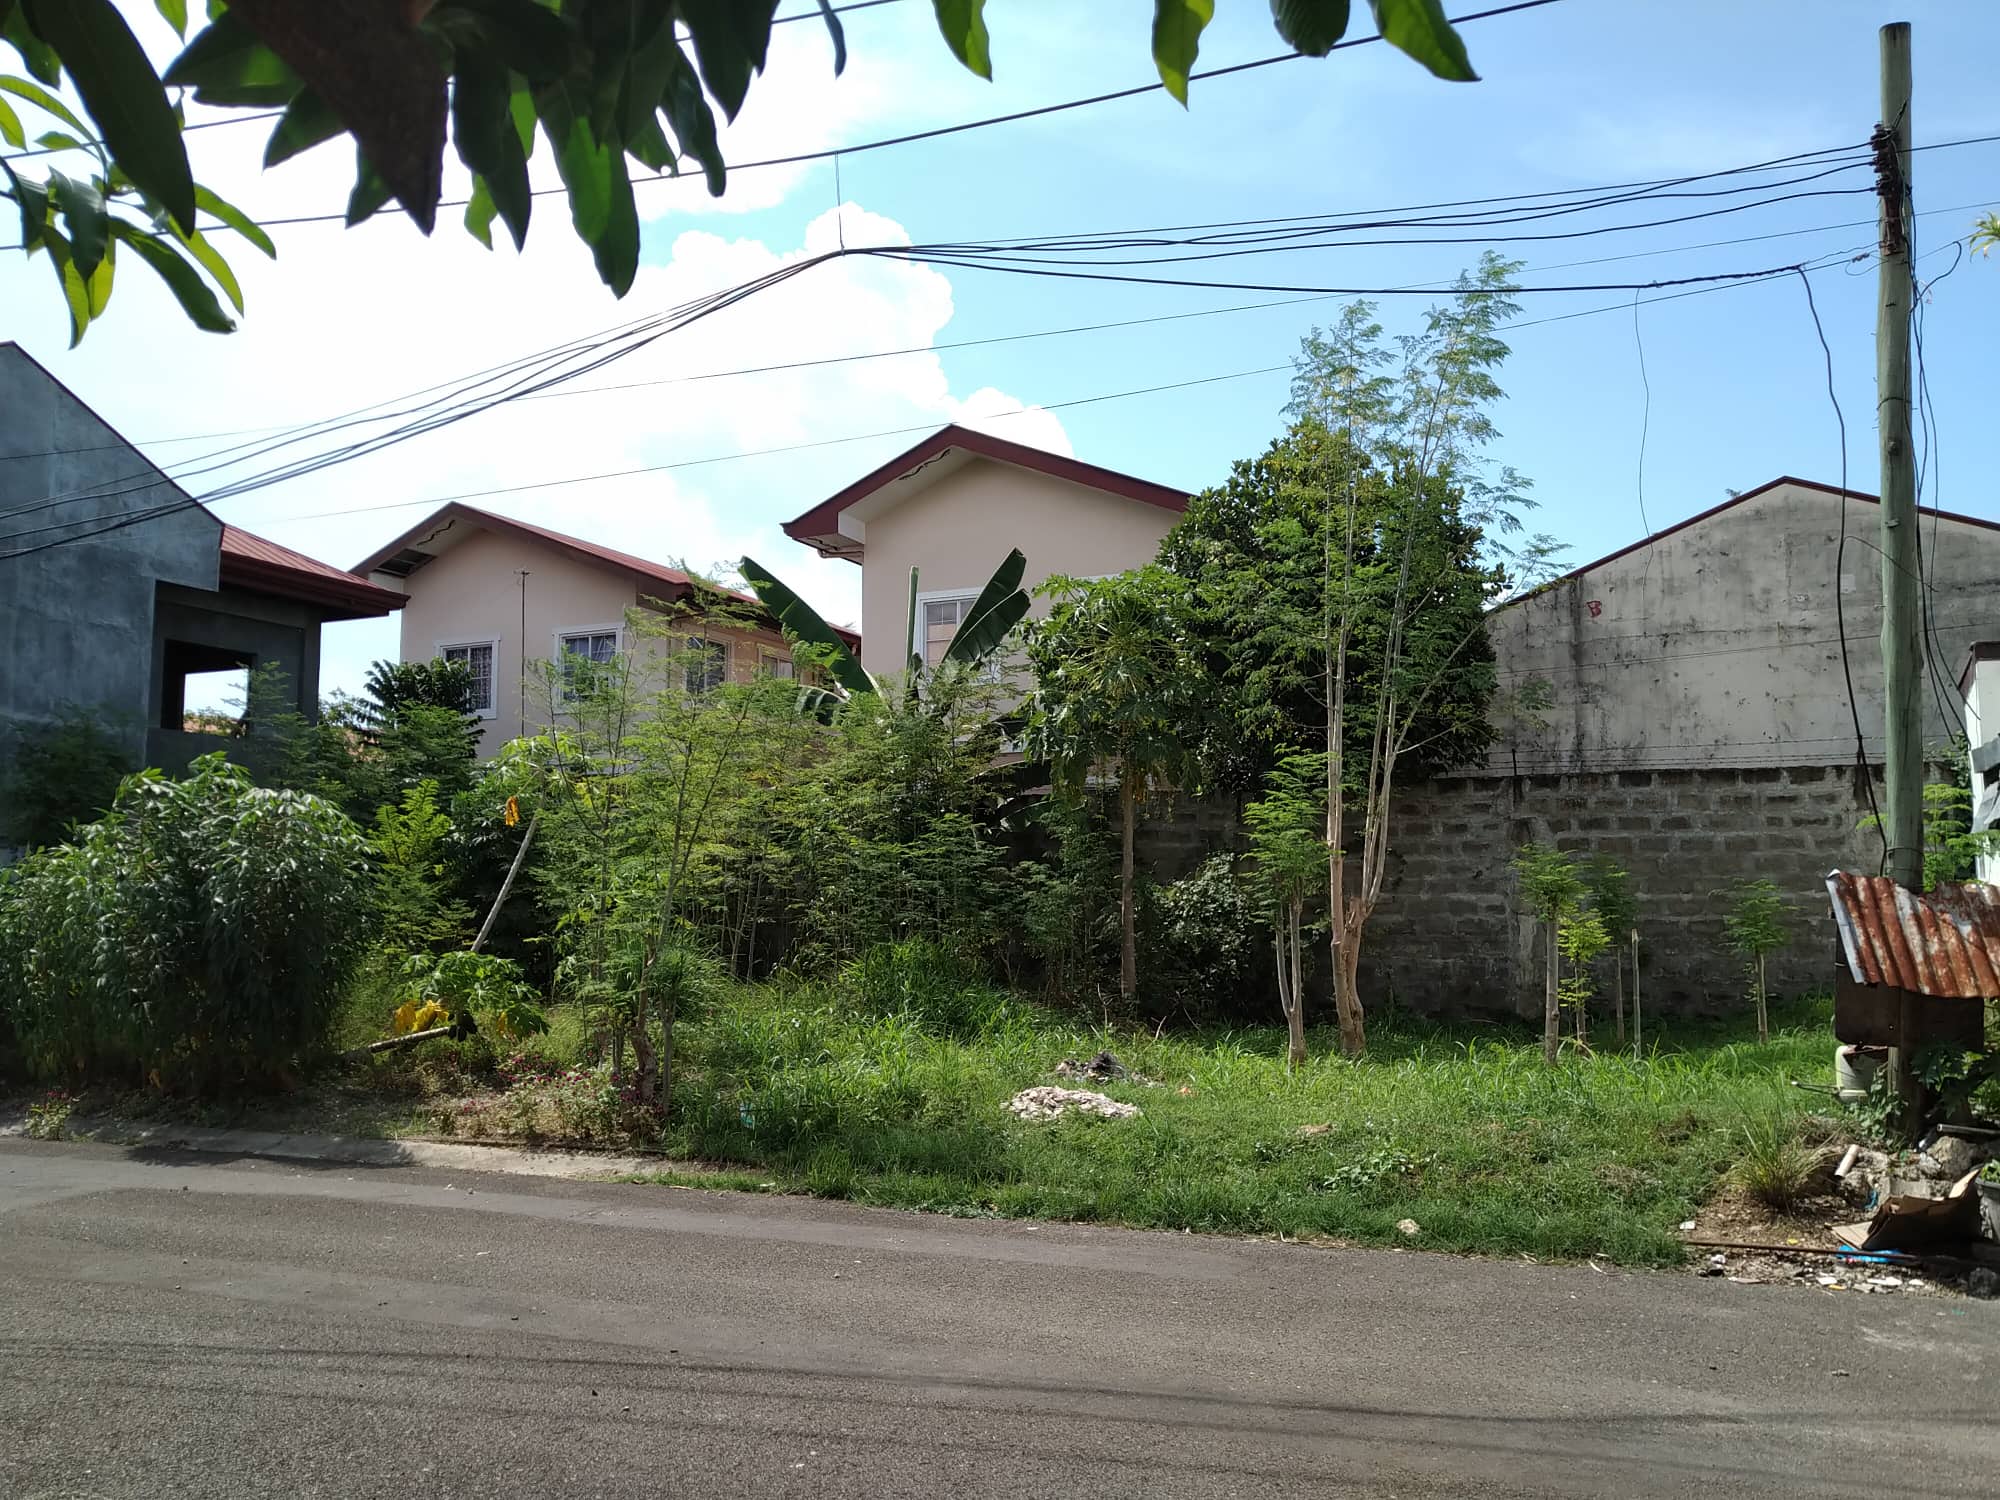 Residential Lot In Peninsula Place For Sale